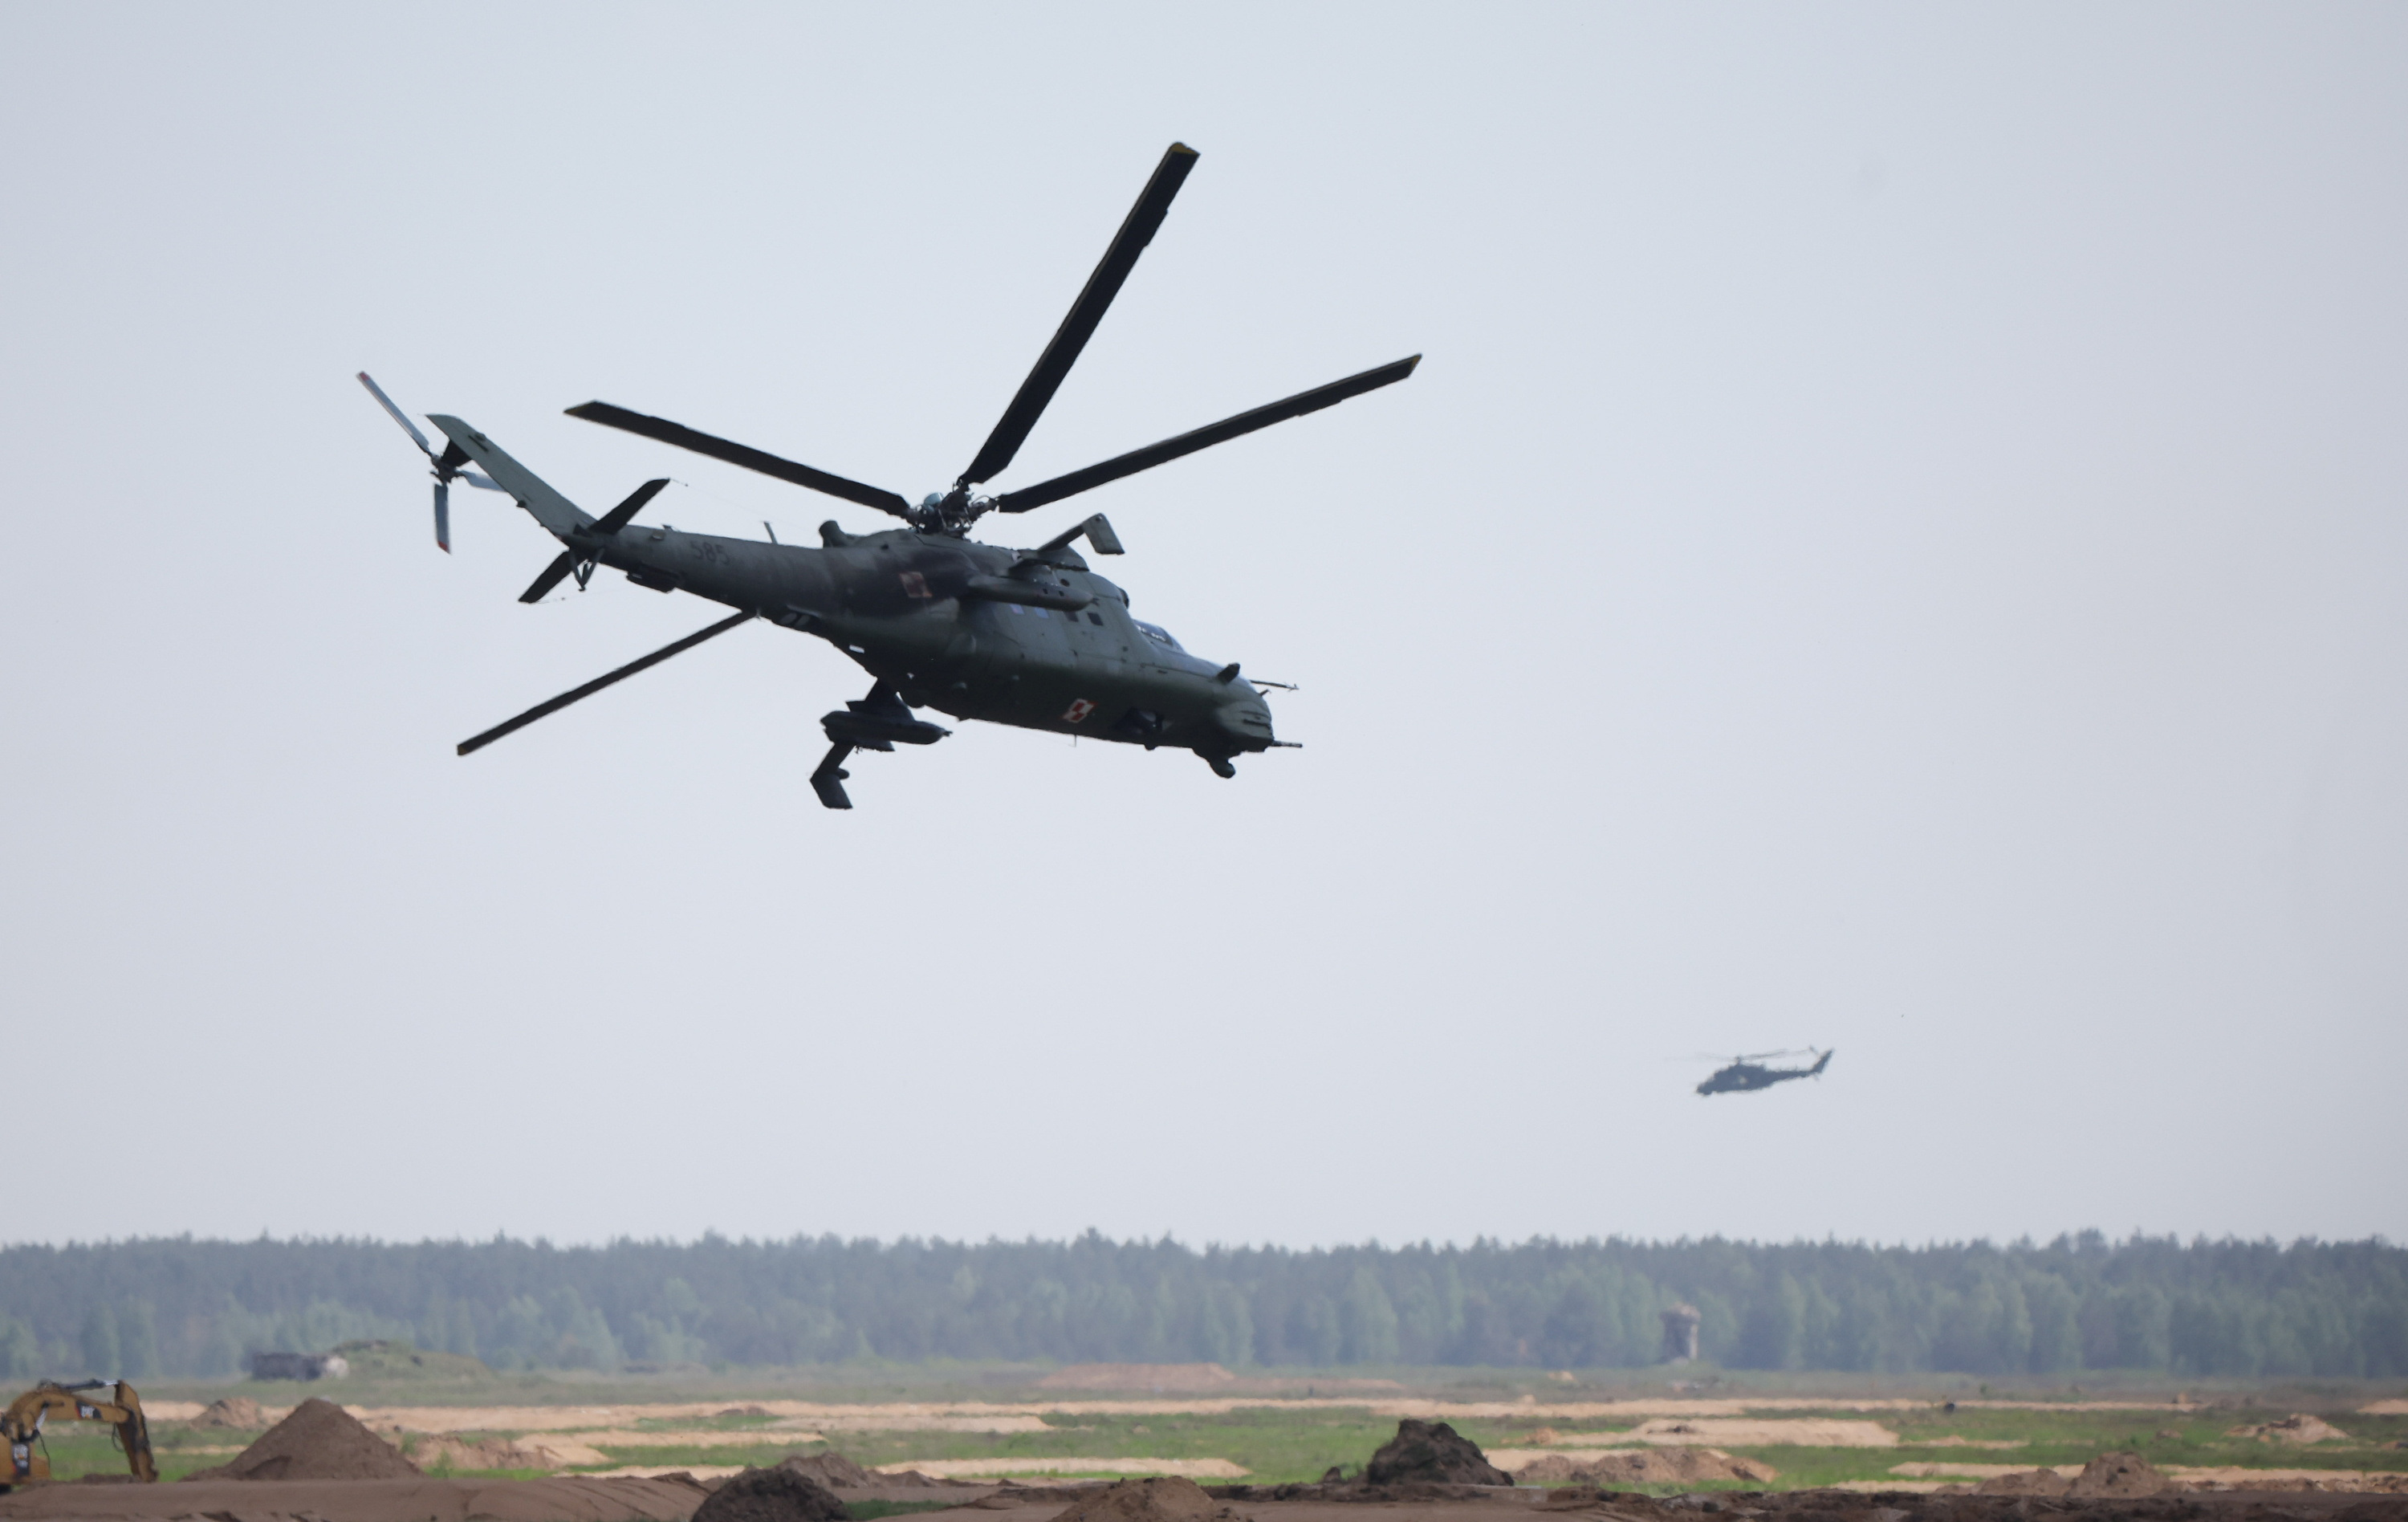 Polish Mi-24 helicopters flight during Defender Europe 2022 military exercise at the military range in Bemowo Piskie